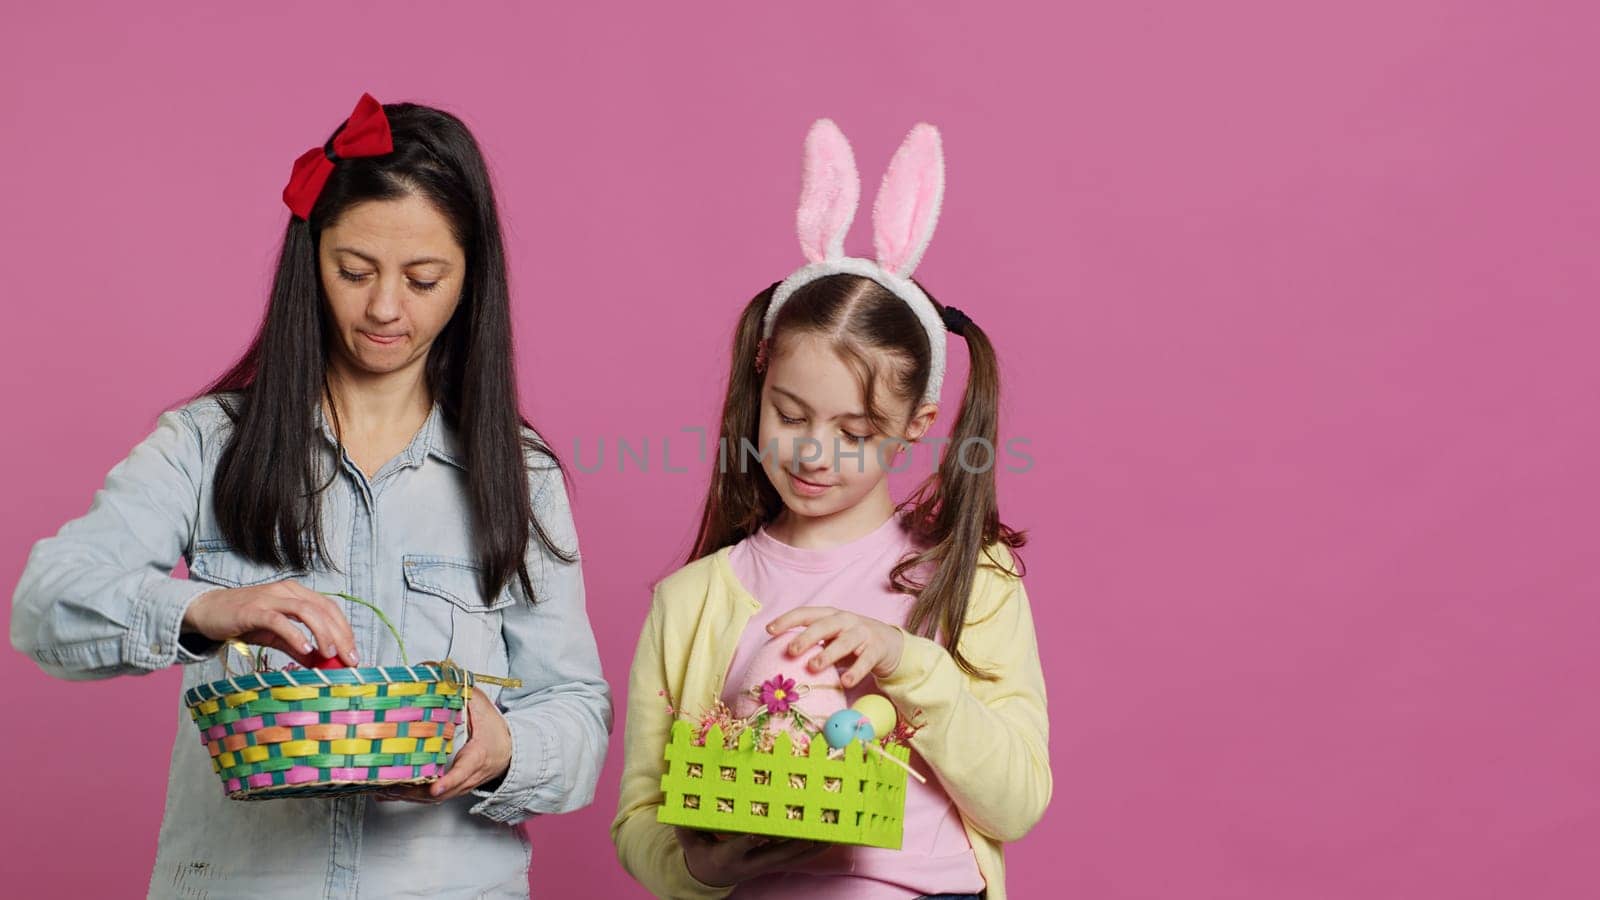 Joyful confident child and mother showing easter baskets on camera, decorating festive arrangements for spring holiday. Happy schoolgirl with bunny ears posing with her mom in studio. Camera A.